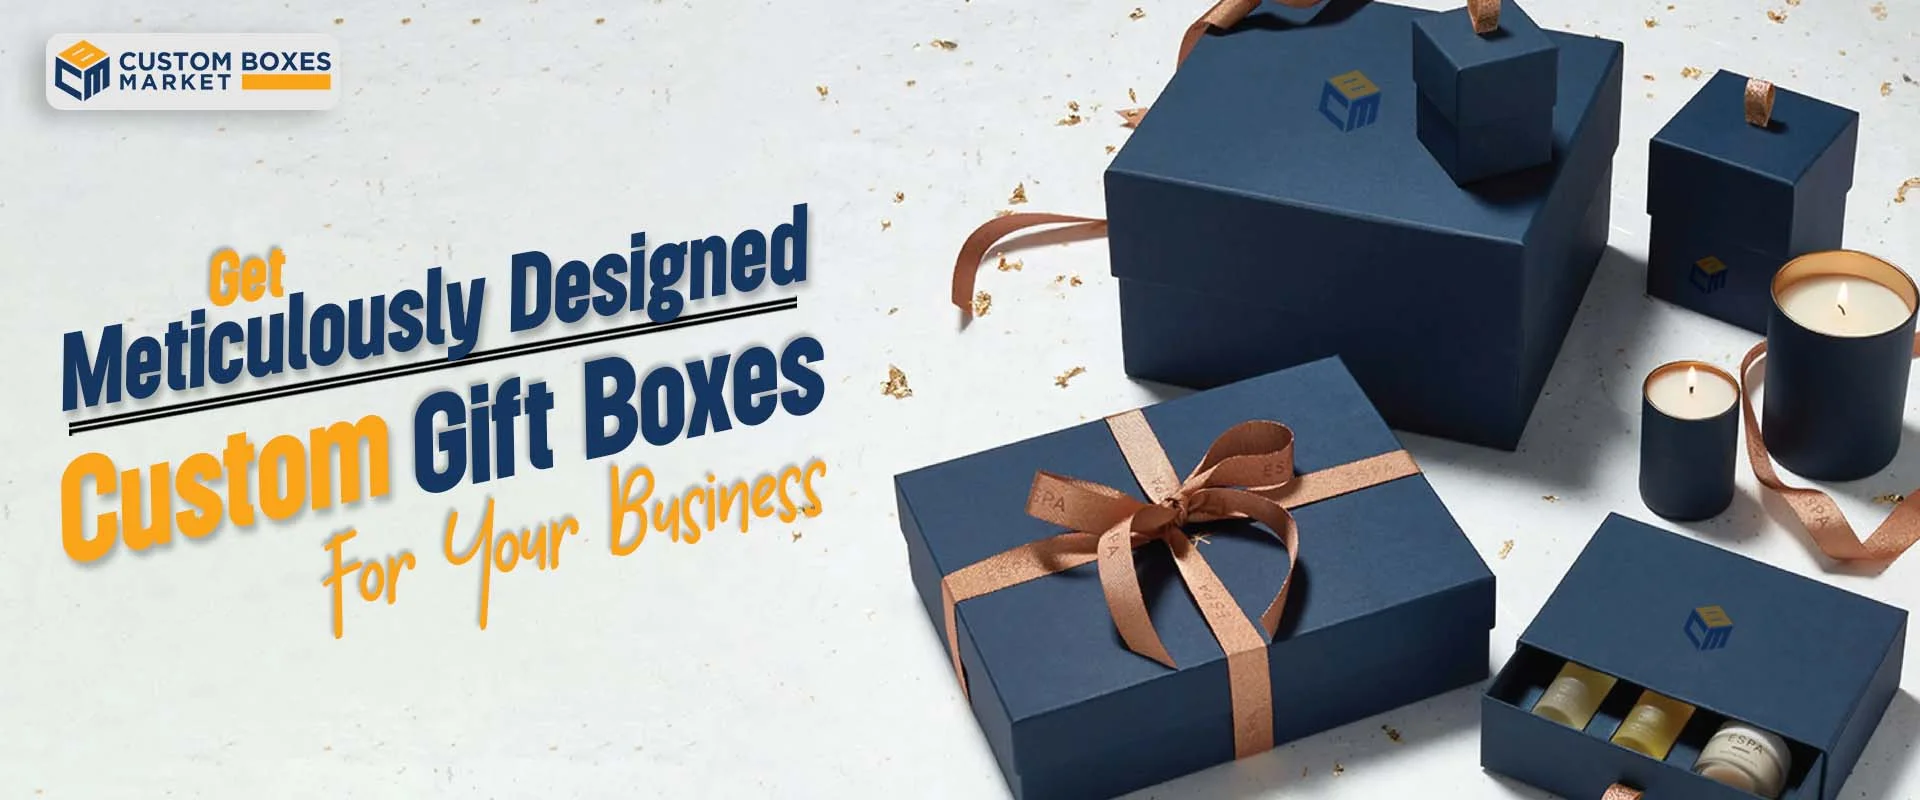 Get Meticulously Designed Custom Gift Boxes For Business